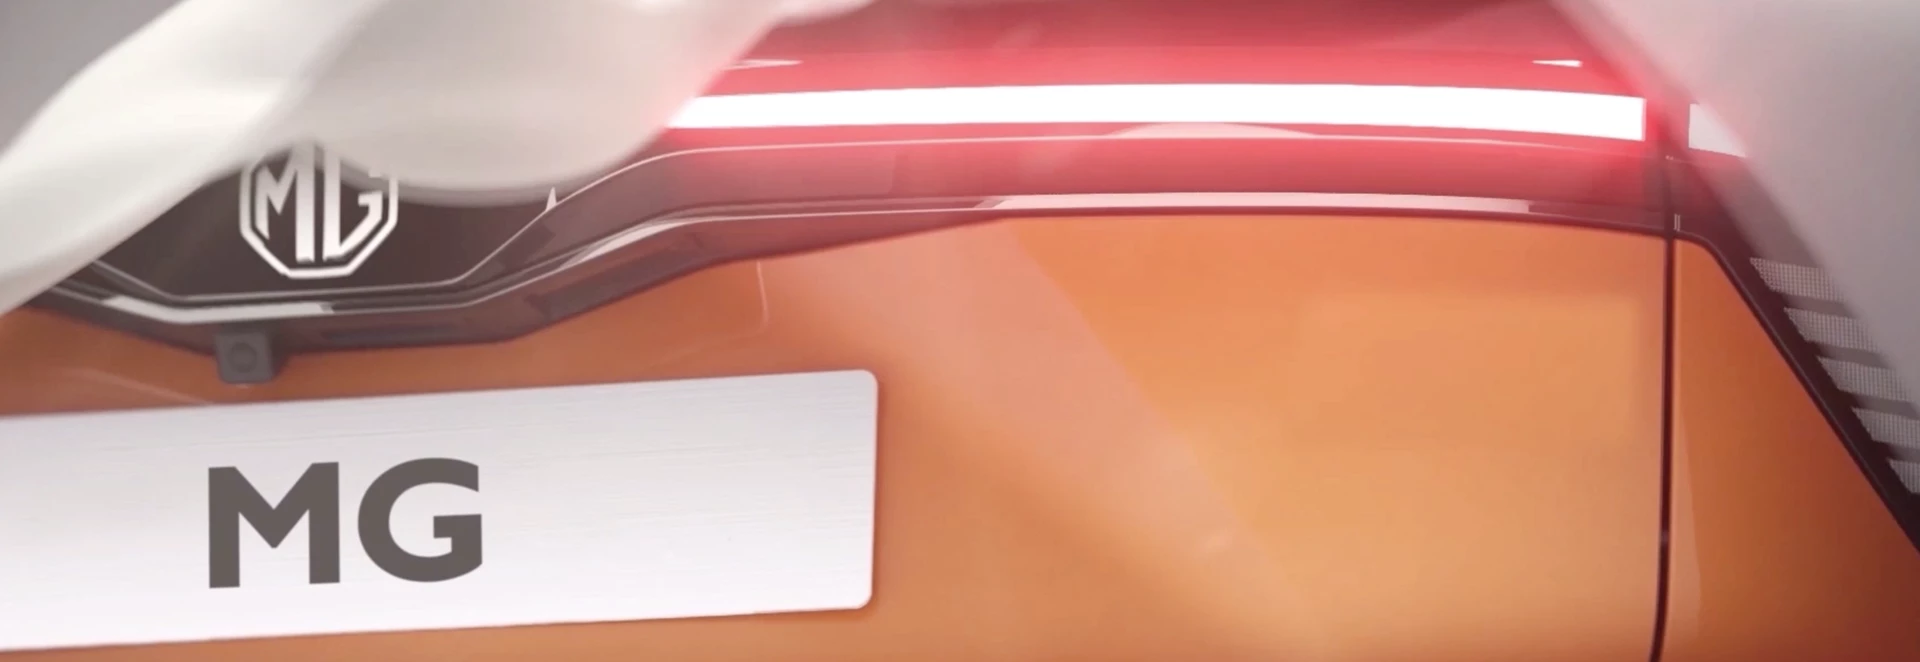 MG teases new electric hatchback due later in 2022 